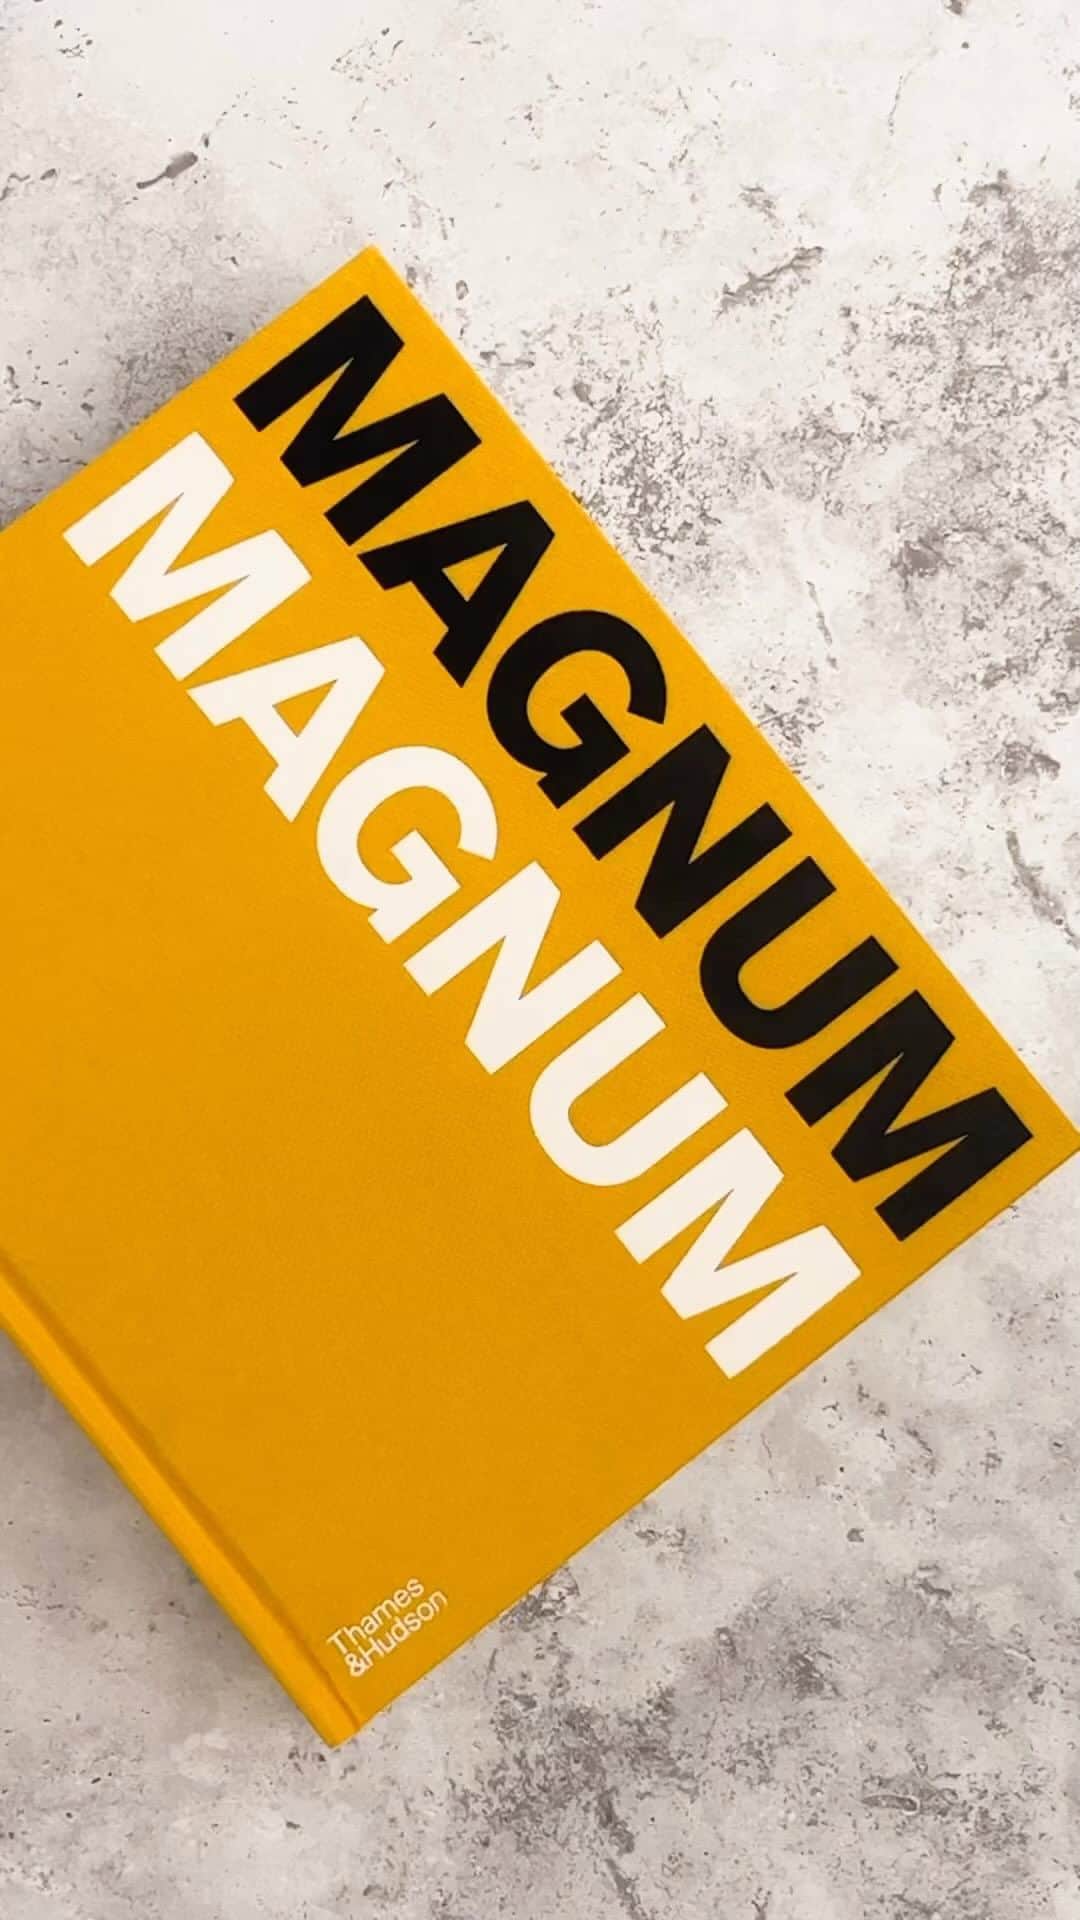 Magnum Photosのインスタグラム：「Out today, ‘Magnum Magnum’ showcases the best of Magnum Photos, celebrating the vision, imagination and brilliance of its photographers – from the acknowledged 20th-century greats to the modern masters and rising stars of our time.  Since its founding in 1947 by Robert Capa, Henri Cartier-Bresson, George Rodger and David ‘Chim’ Seymour, Magnum Photos - the legendary co-operative - has powerfully chronicled the peoples, cultures, events and issues of the time.   Now, following its 75th anniversary, Magnum Photos and Thames & Hudson have joined forces to publish an updated and expanded edition of the original hit publication.   @magnumphotos   #magnumphotos」